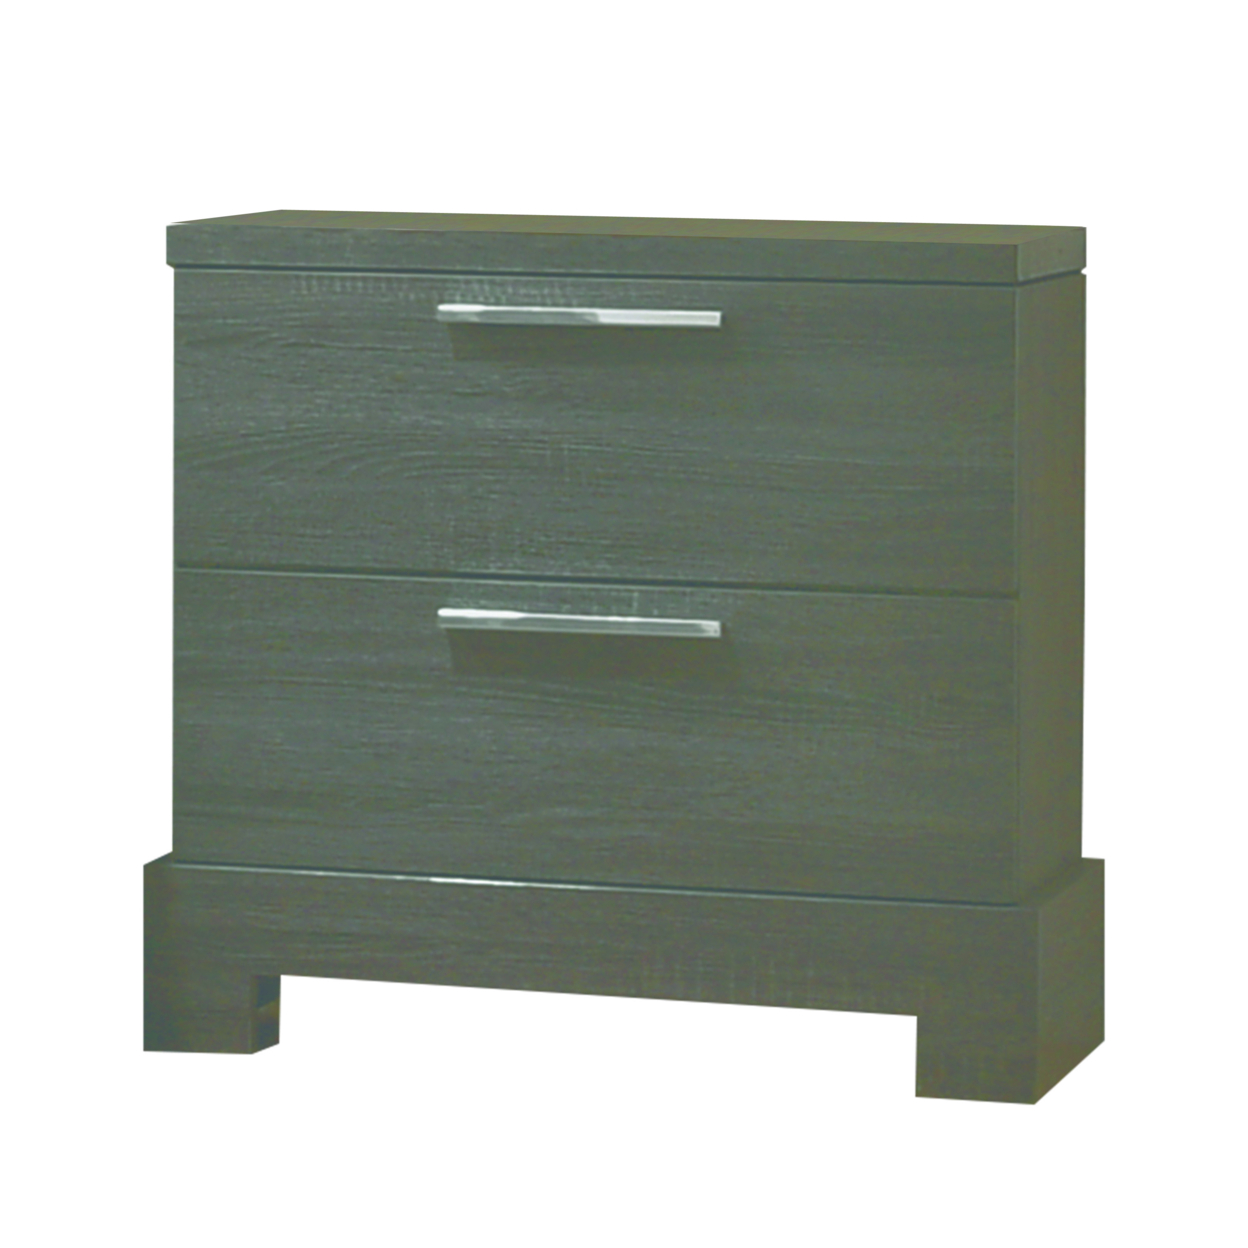 2 Drawer Wooden Nightstand With Bar Pulls And Panel Support, Gray- Saltoro Sherpi